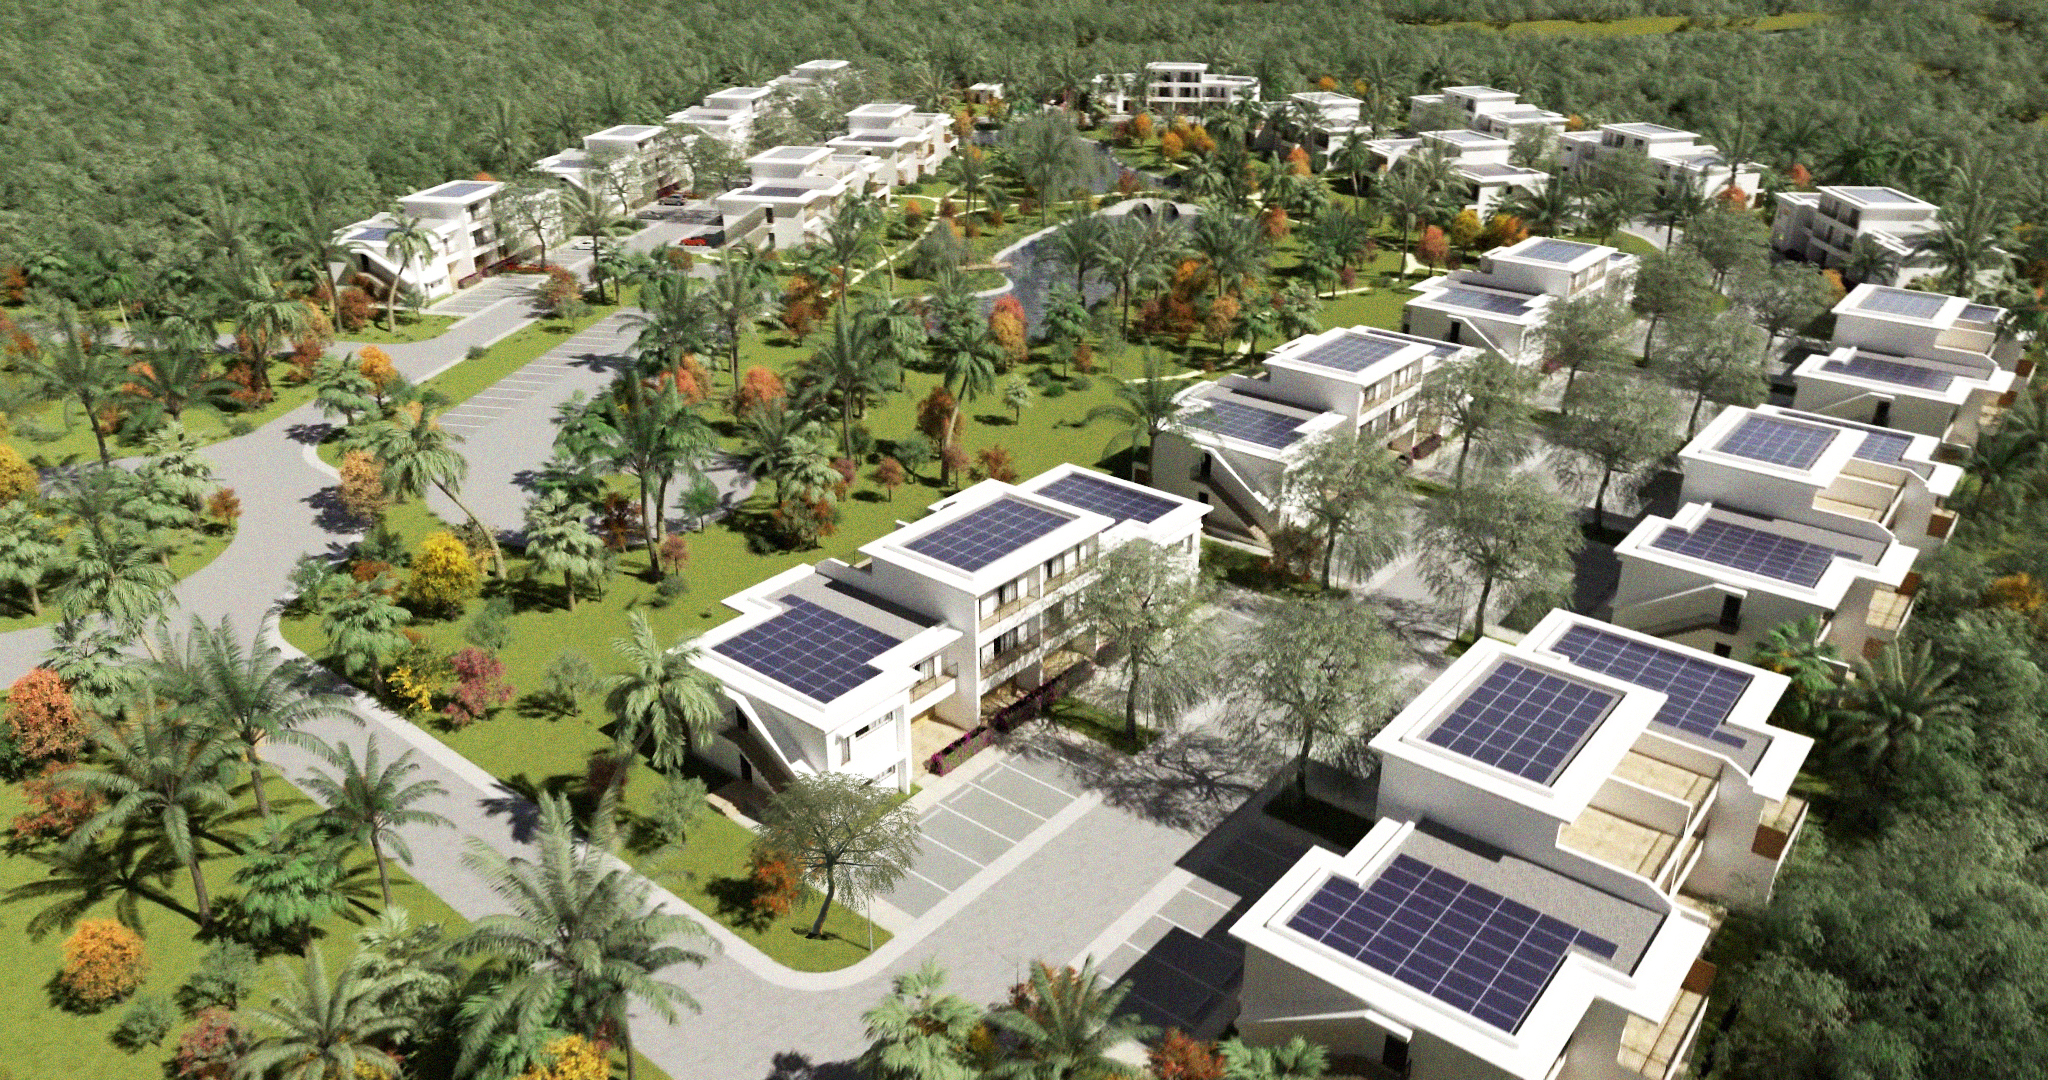 EcoVillage: A New Norm of Healthy Living